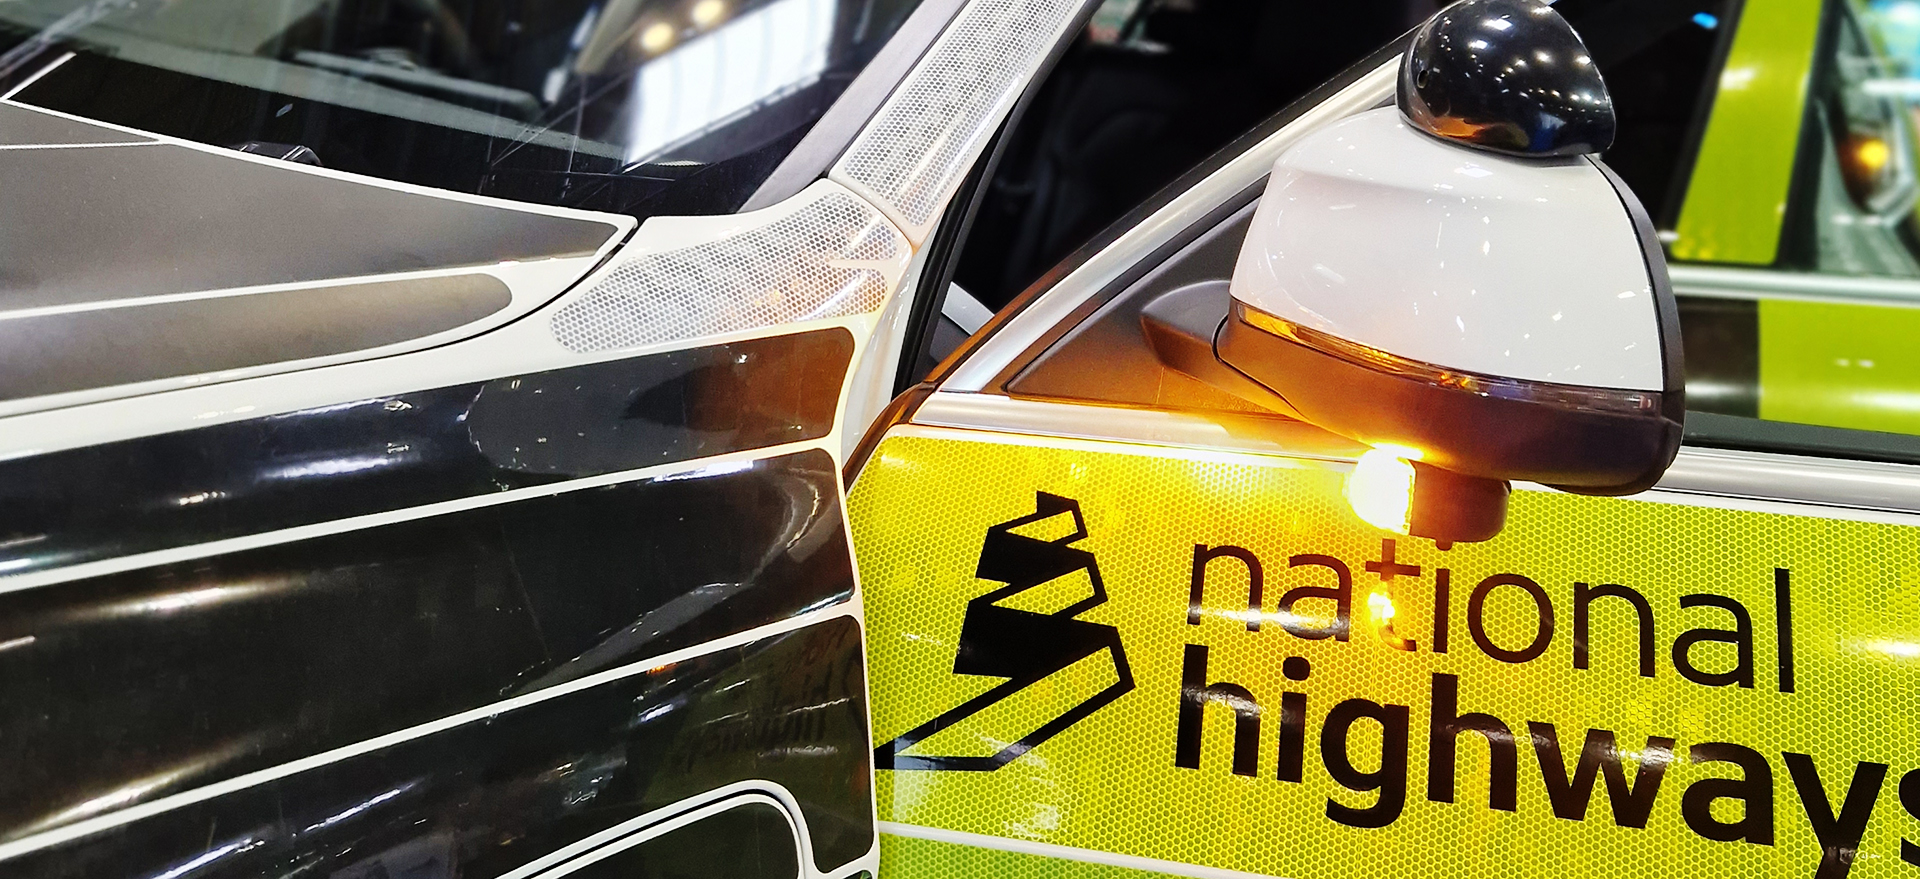 Close up of National Highways Vehicle with Amber Light mounted underneath Wing Mirror